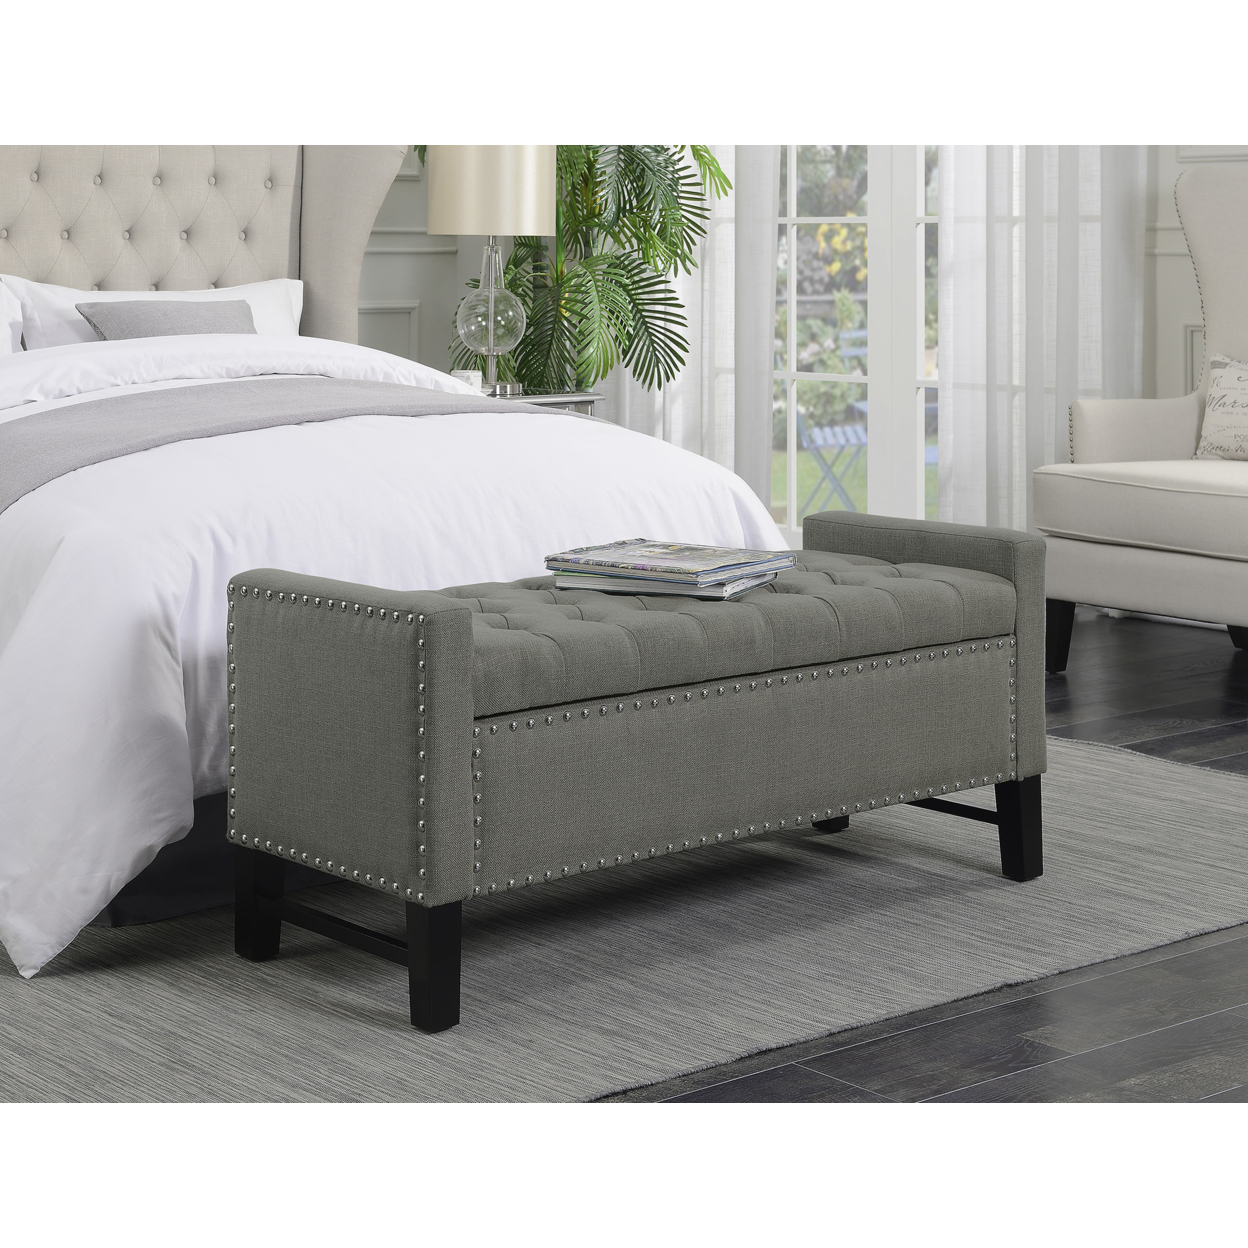 Michael Linen Modern Contemporary Button Tufted With Silver Nailheads Deco On Frame Storage Lid Bench - Dark Grey